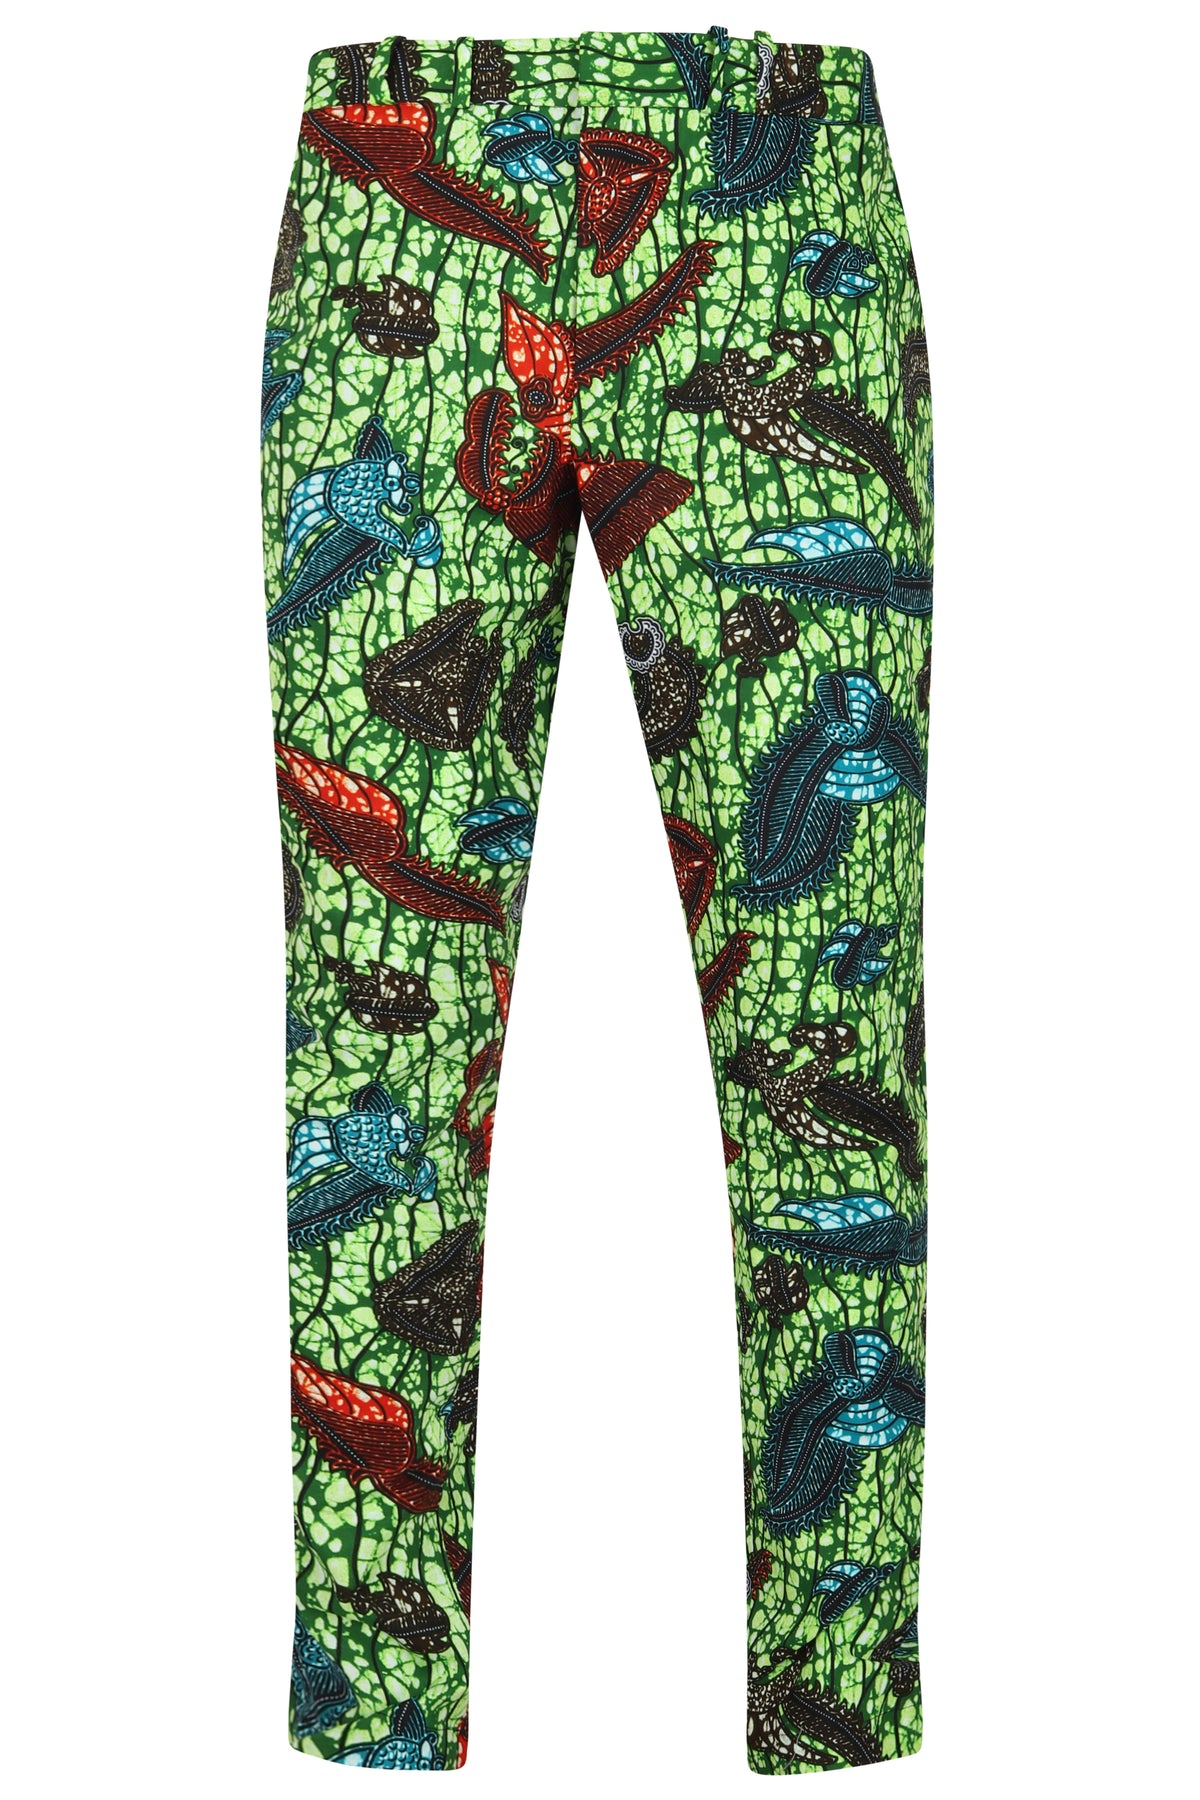 Men's Green African print Fitted trouser-Sea King - OHEMA OHENE AFRICAN INSPIRED FASHION